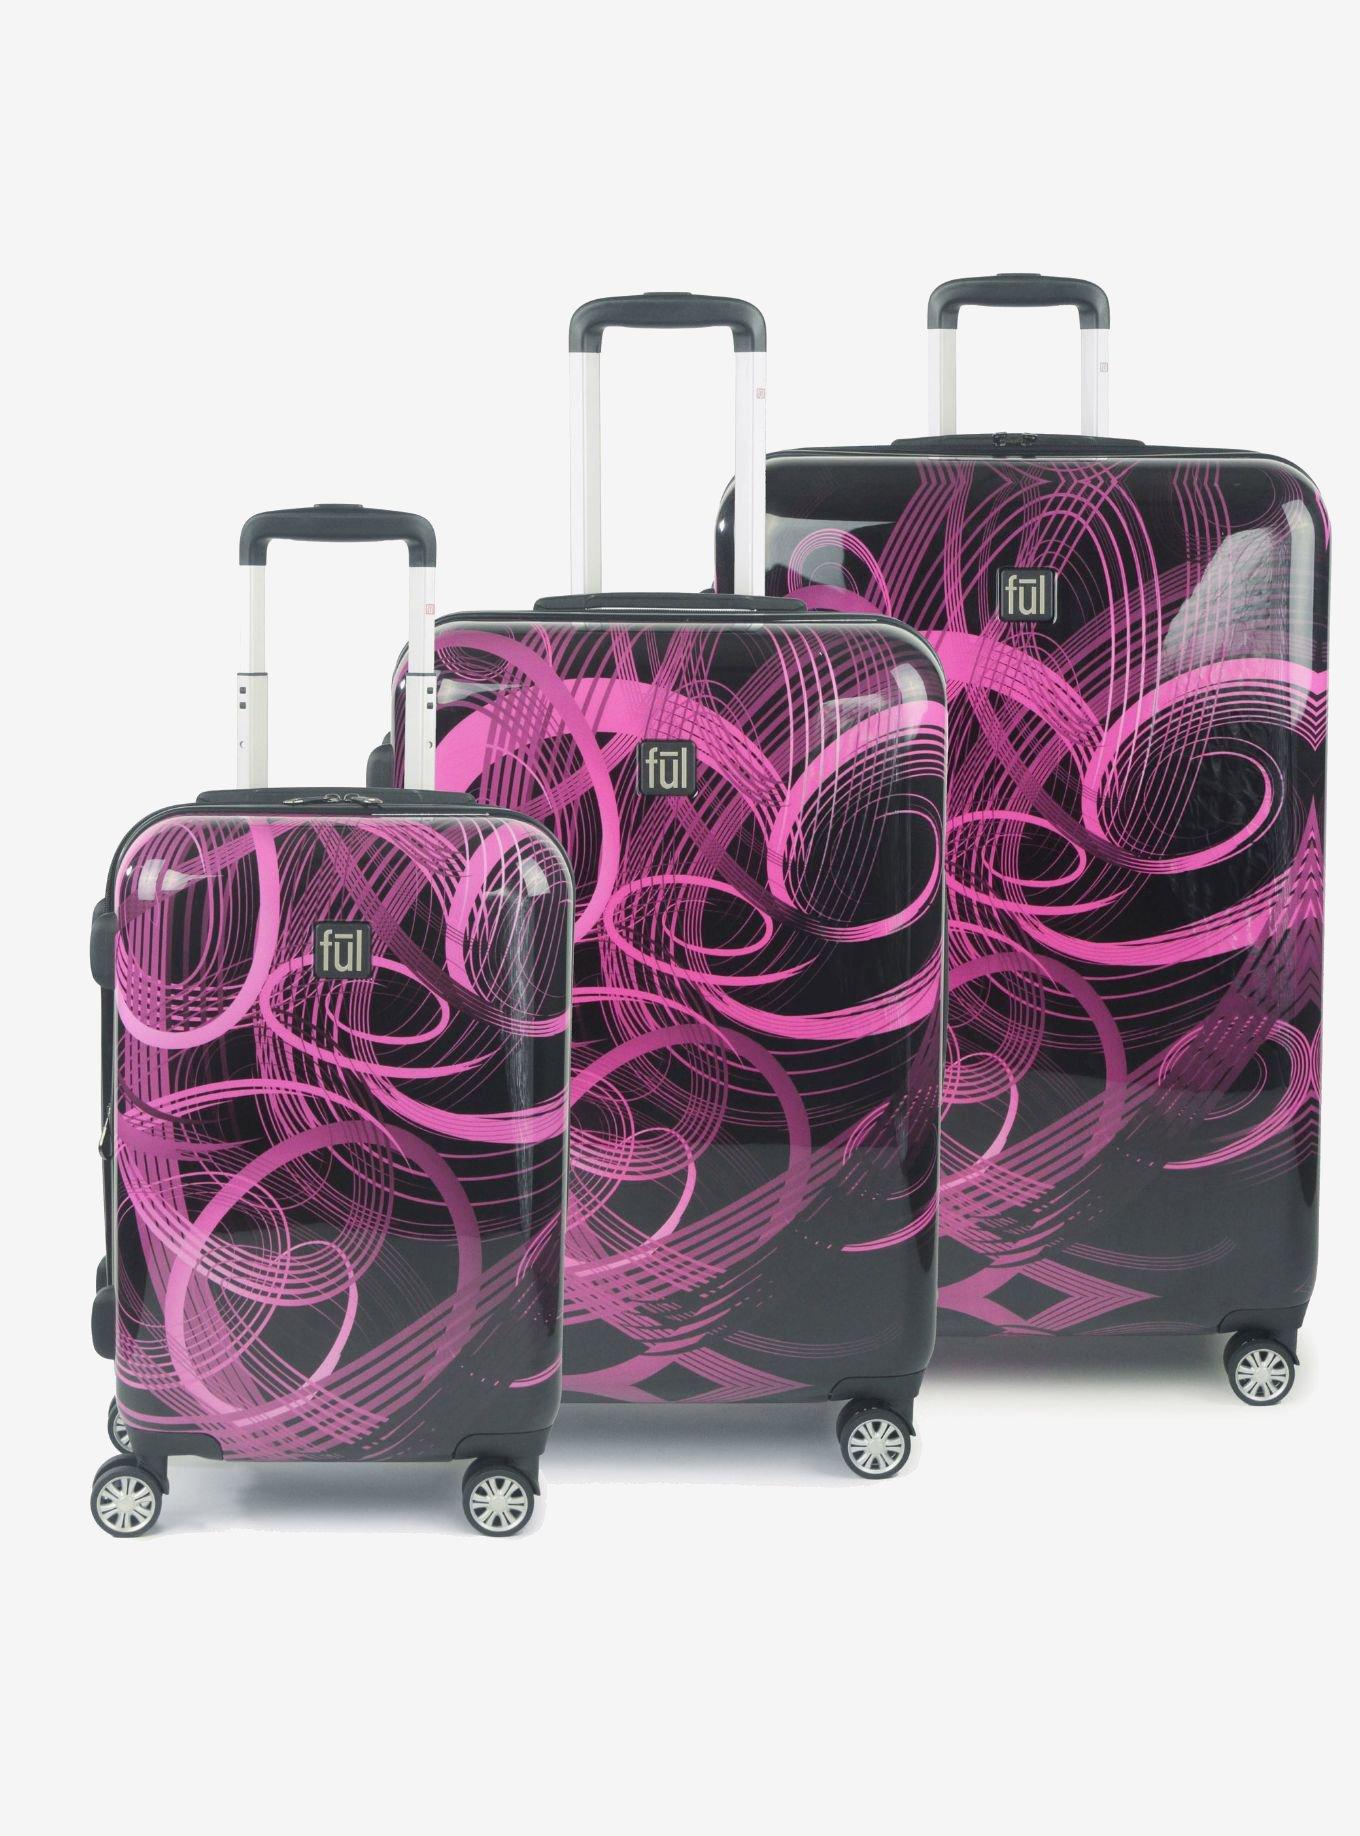 FUL Atomic Spinner Rolling Luggage Suitcase Nested 3 Piece Luggage Set, , hi-res